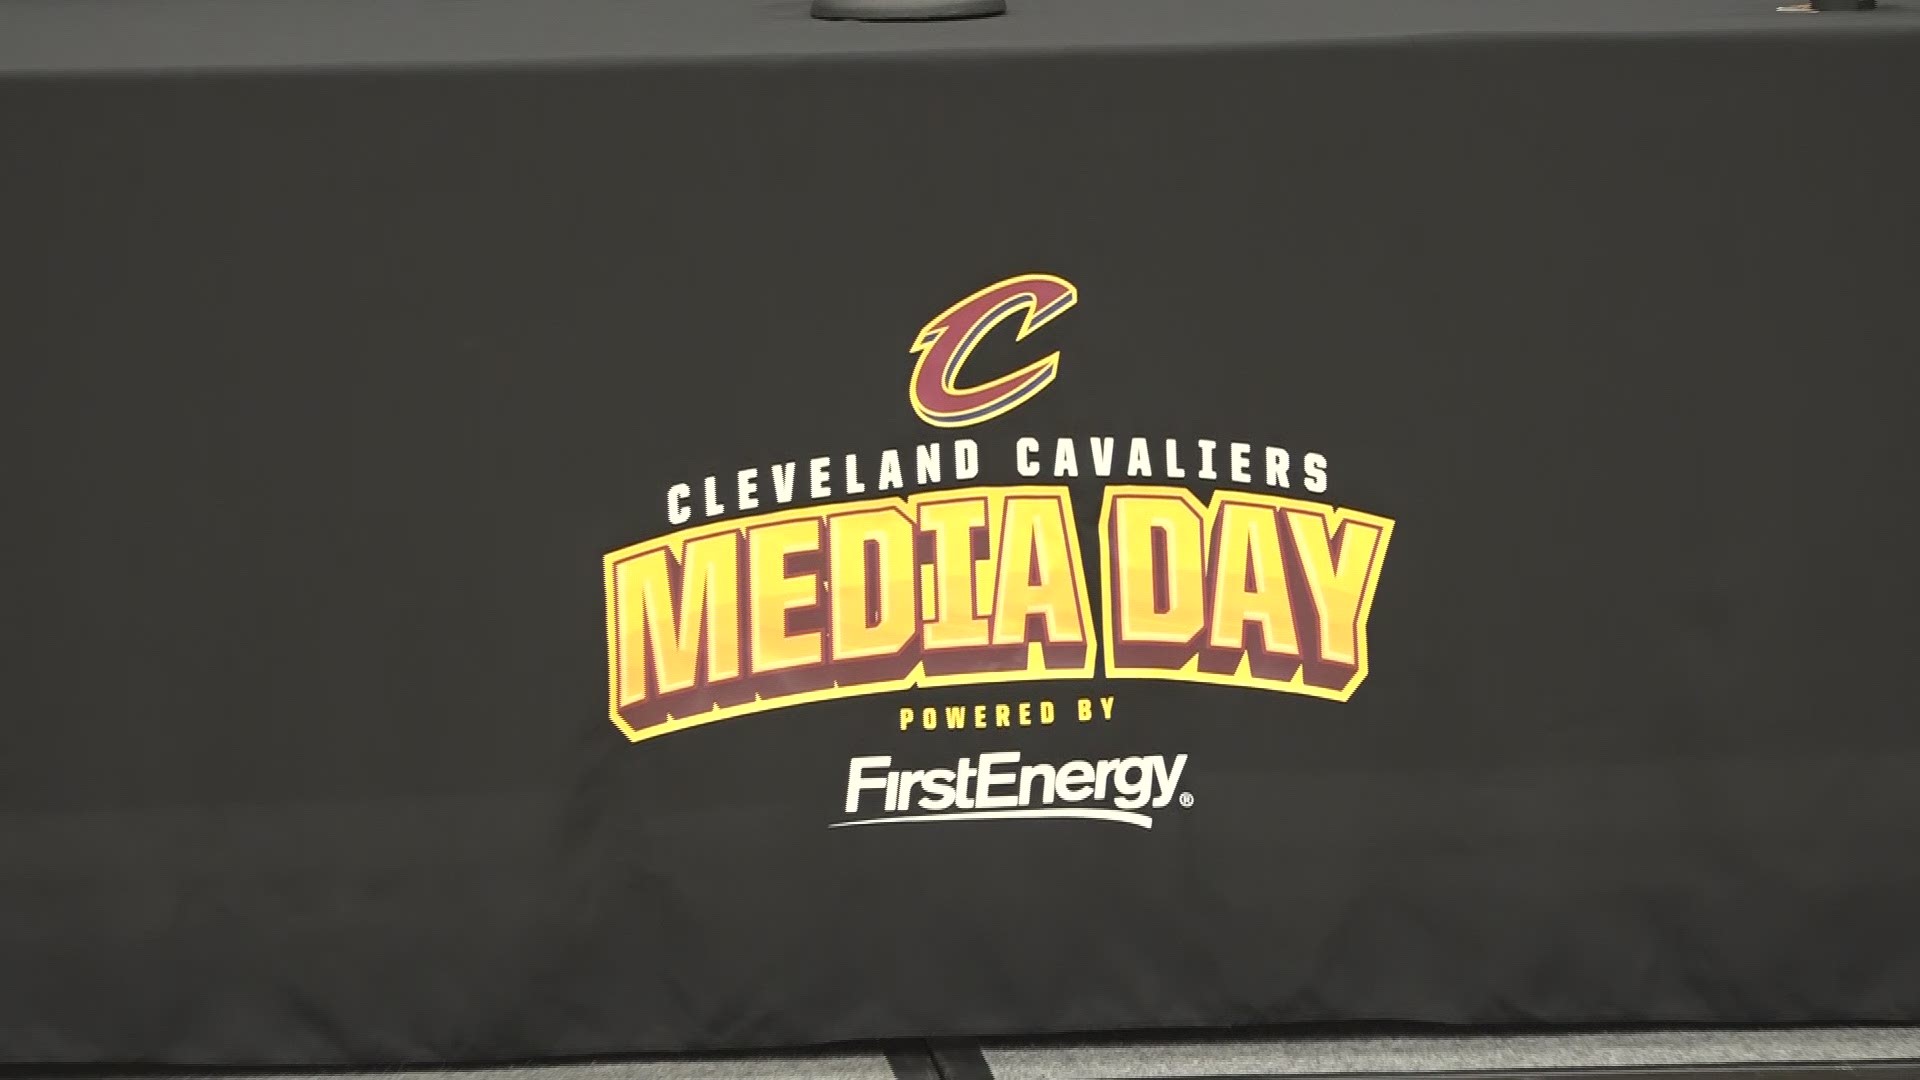 Cavs Media Day: sights and sounds in the post-LeBron era